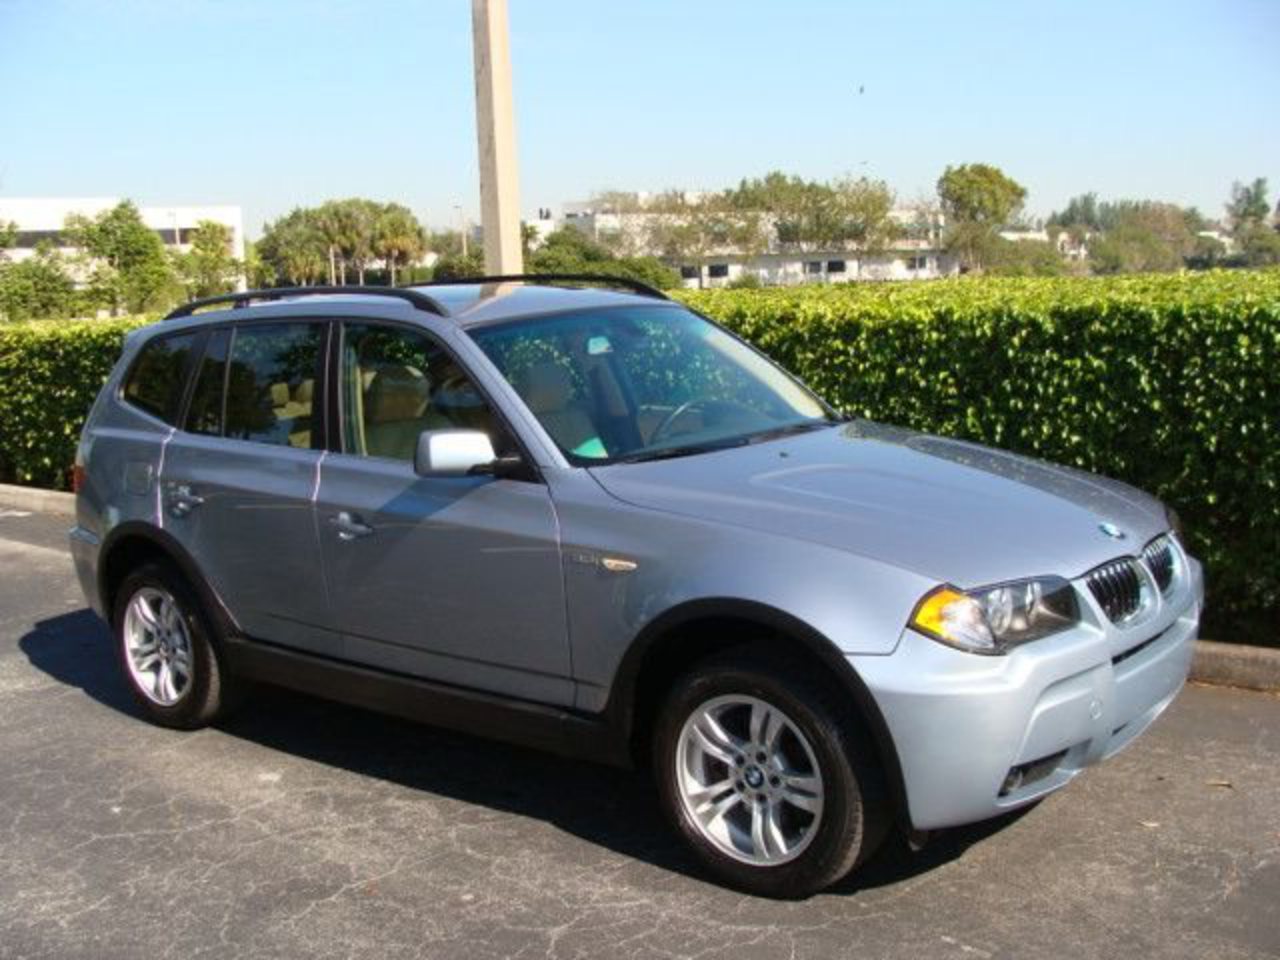 2006 BMW X3 30I AWD SUV This 2006 BMW X3 4dr 30i AWD SUV features a